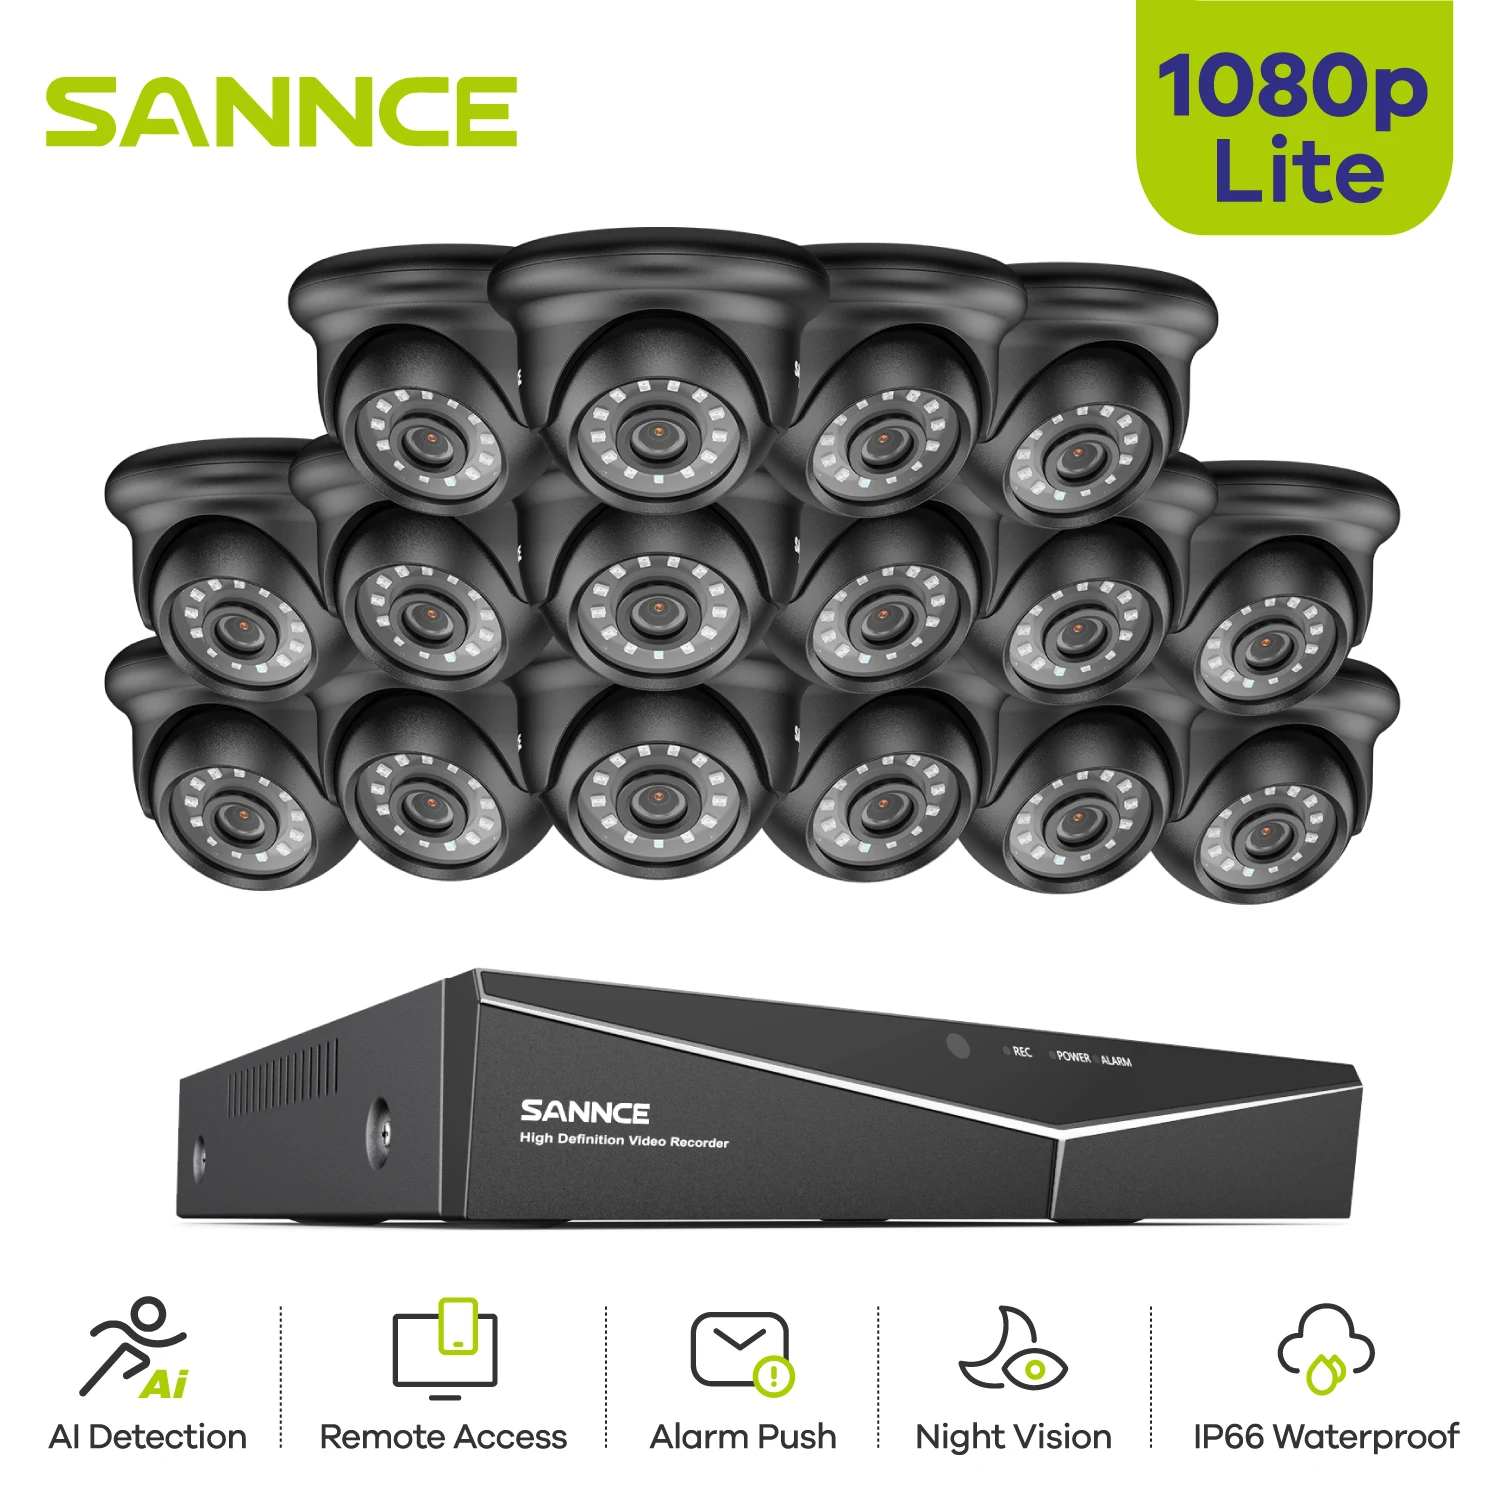 SANNCE 1080p 16CH Full HD Wired Security Camera Set Outdoor IP66 Waterproof 2MP 5-in-1 Digital Video Recorder 16PCS TVI Cameras